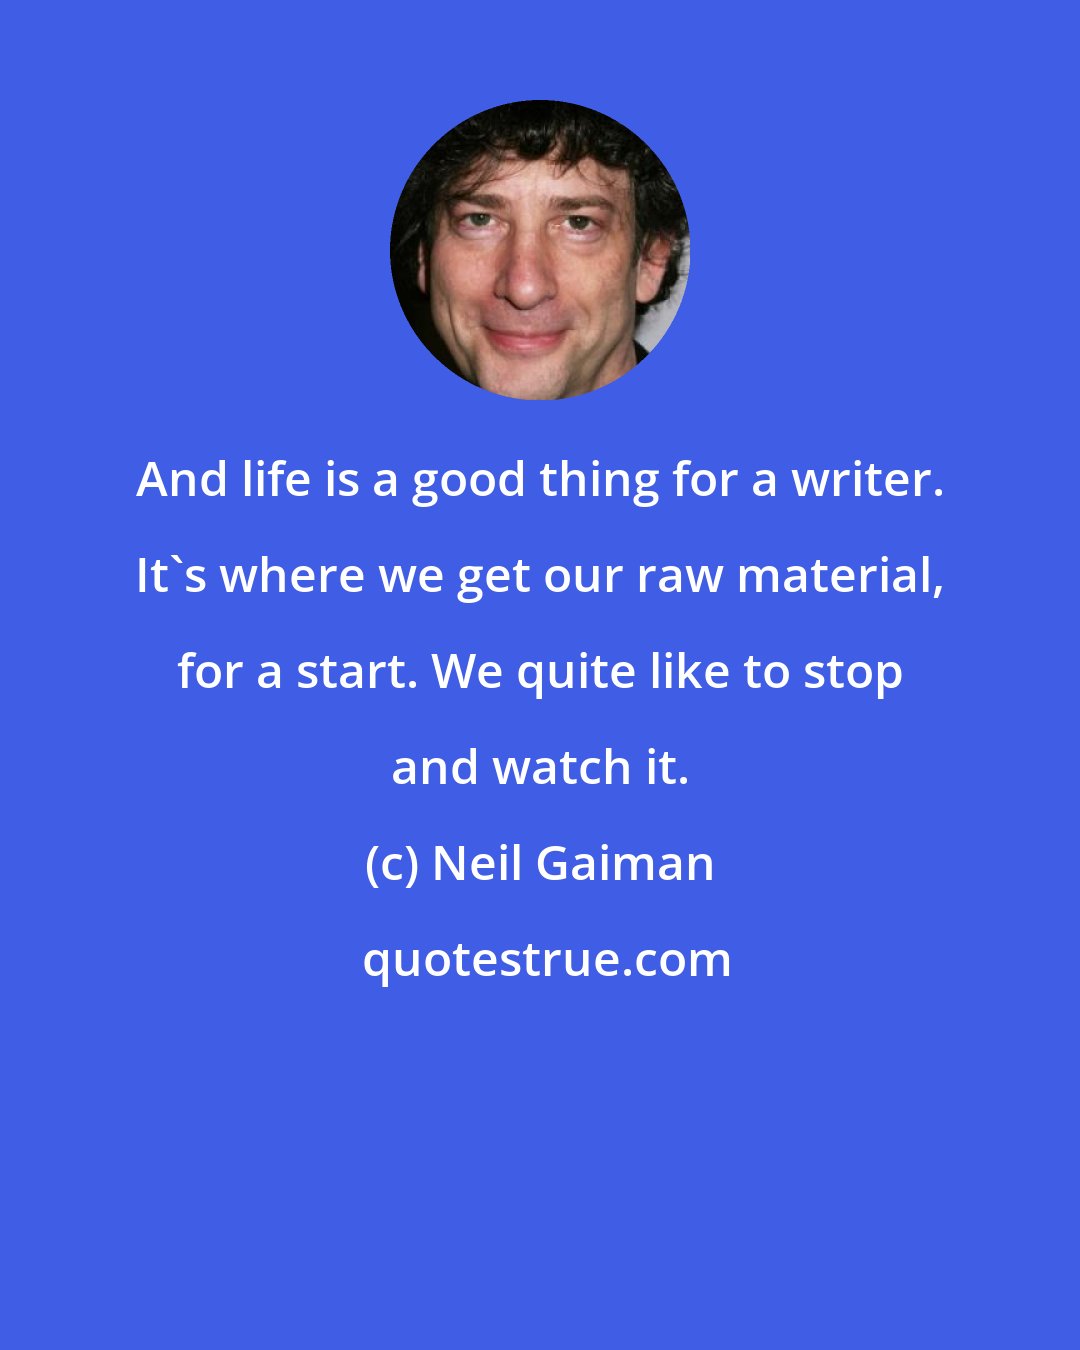 Neil Gaiman: And life is a good thing for a writer. It's where we get our raw material, for a start. We quite like to stop and watch it.